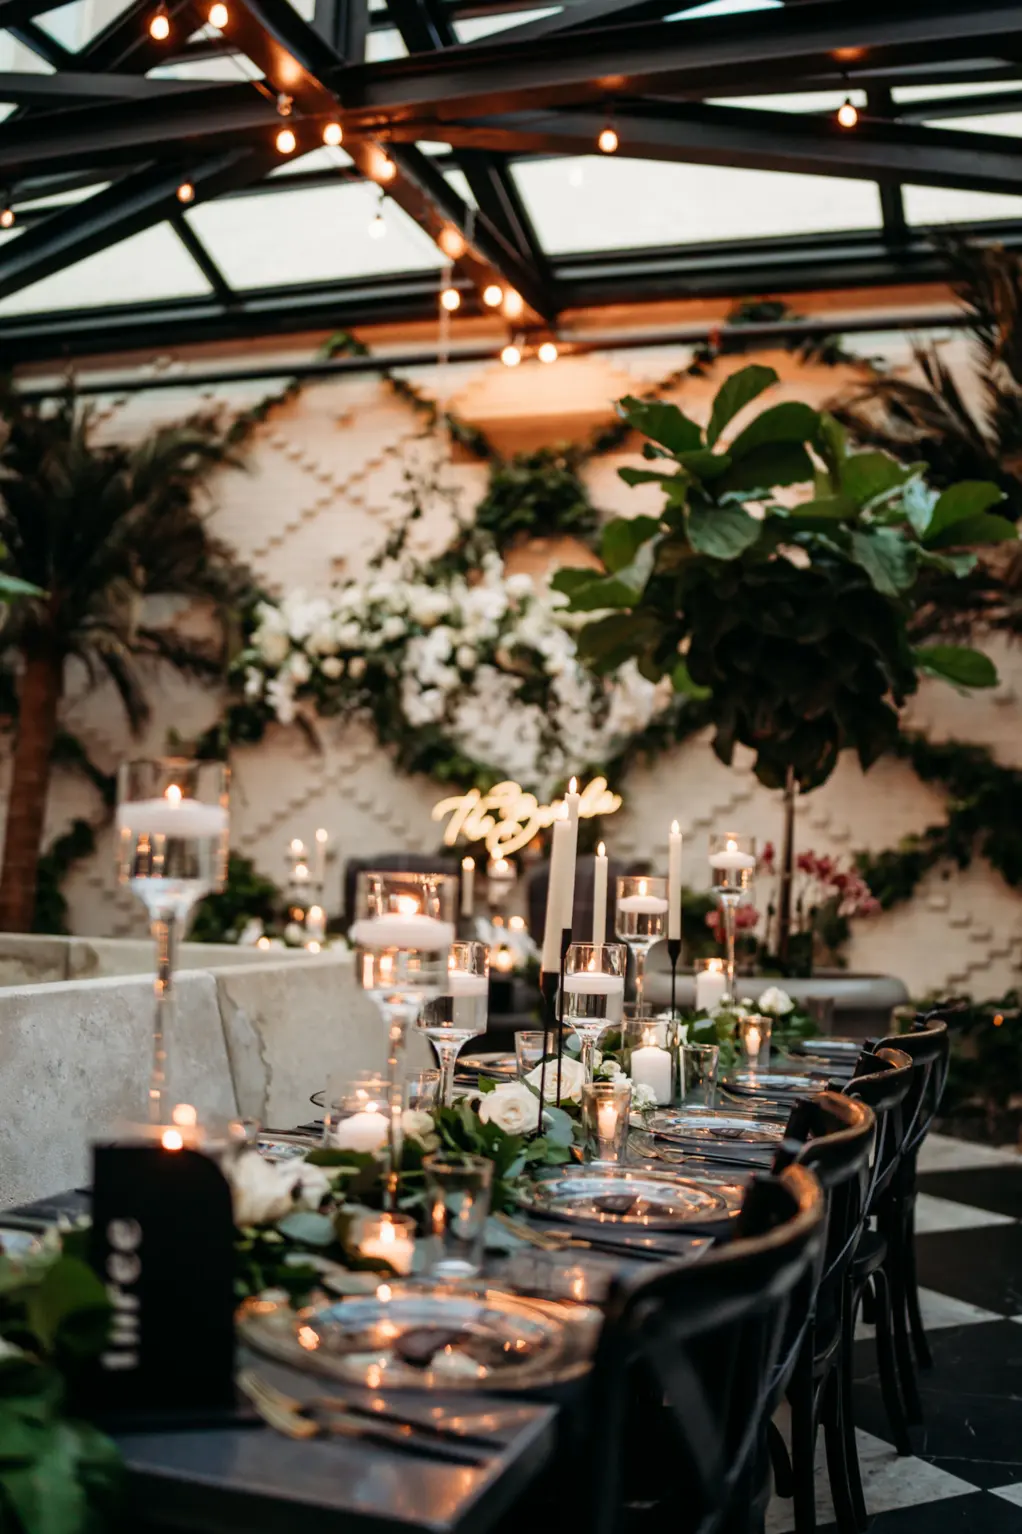 Modern Romantic Black and White Conservatory Wedding Reception Inspiration | Floating Candles, White Roses, and Greenery Garland Centerpiece Decor Ideas | Tampa Bay Planner Wilder Mind Events | Downtown Event Venue Oxford Exchange